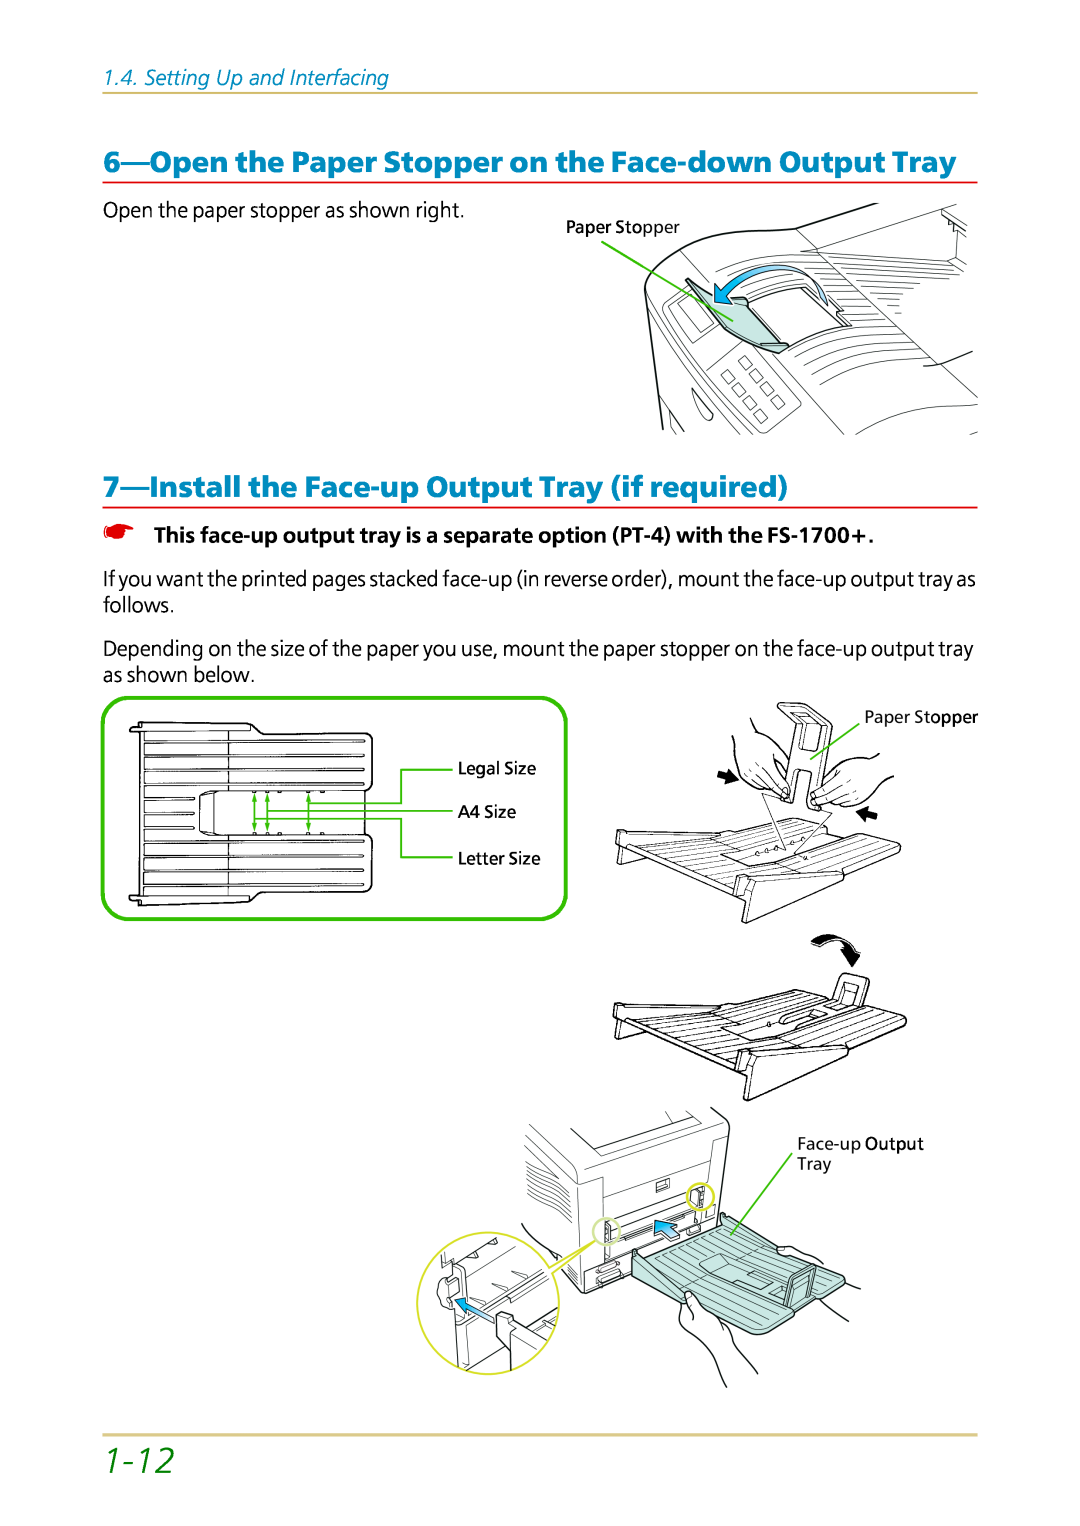 Kyocera FS-1700 user manual 1-12, Installthe Face-upOutput Tray if required, Setting Up and Interfacing 